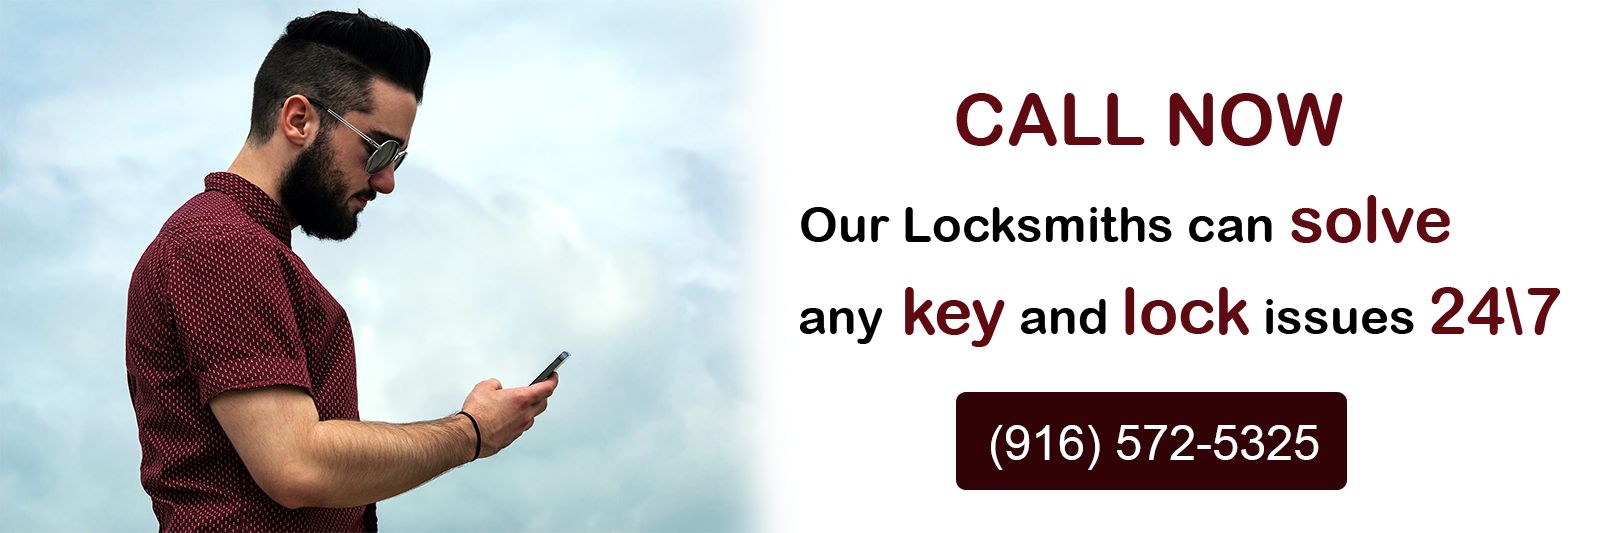 Call Now For 24 Hour Locksmith Services